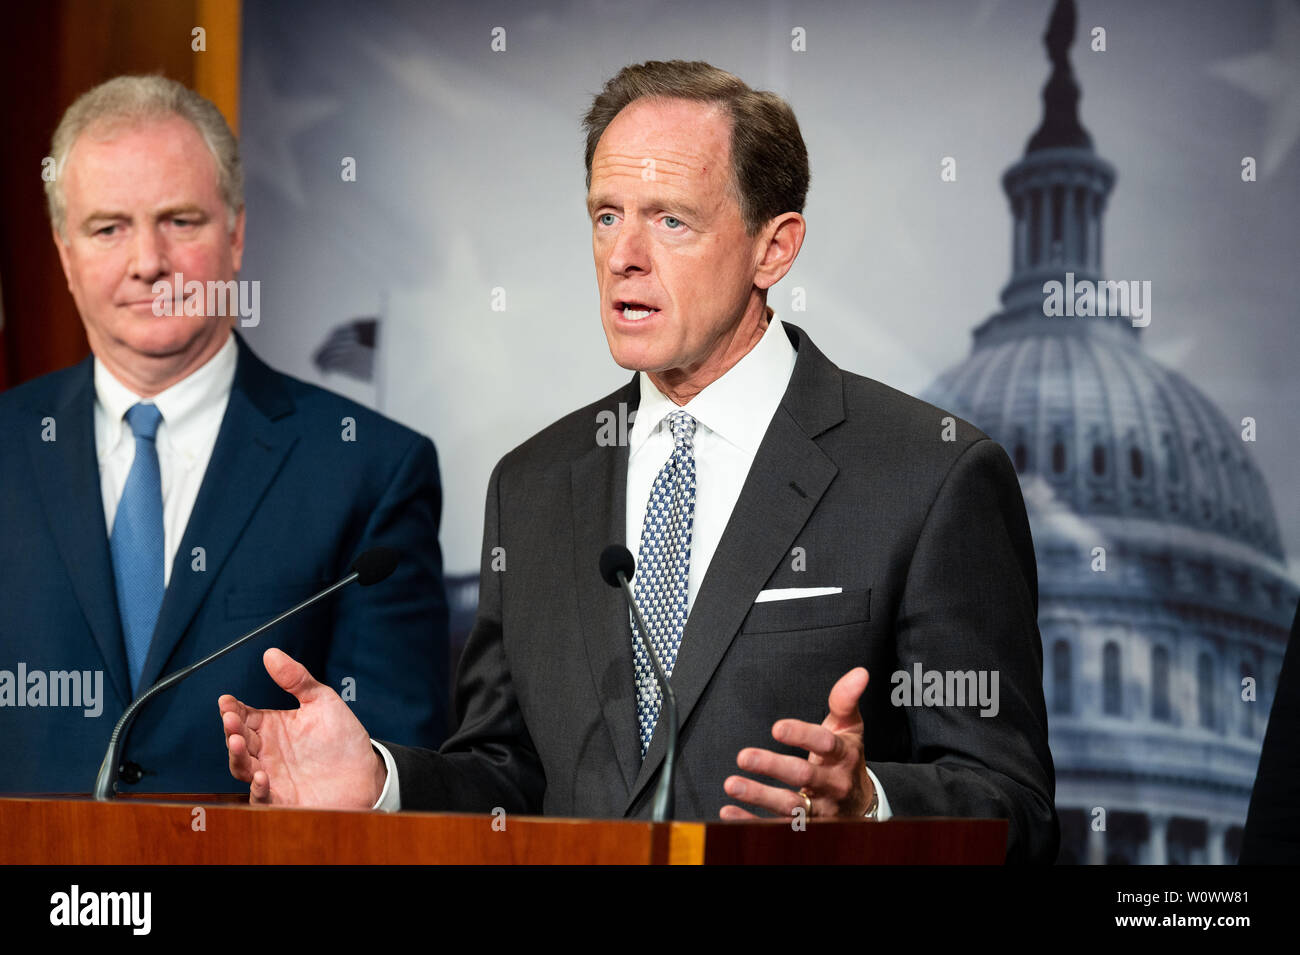 Washington, United States. 27th June, 2019. U.S. Senator Pat Toomey (R-PA) speaking at a press conference on sanctions on North Korea in the National Defense Authorization Act at the US Capitol in Washington, DC. Credit: SOPA Images Limited/Alamy Live News Stock Photo